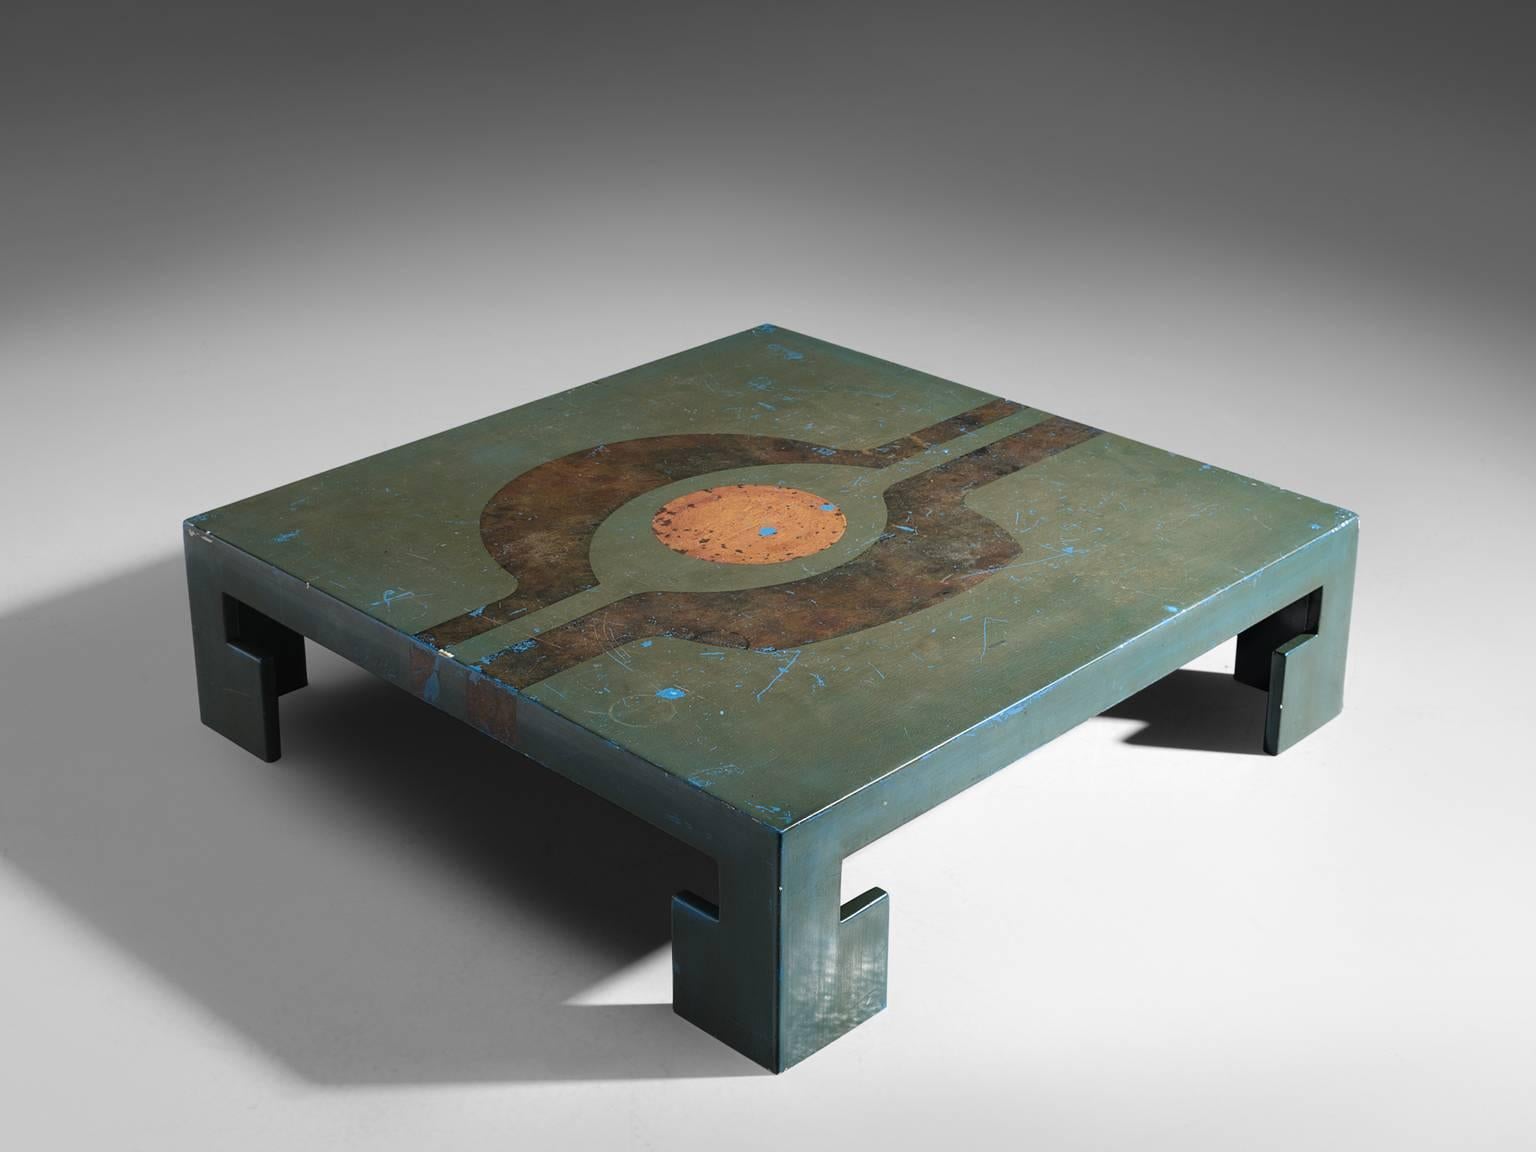 Emiel Veranneman, Coffee table, in wood and paint, Belgium, 1963. 

Stunning coffee or cocktail table by the well know and influential Belgium designer Emiel Veranneman. The table is painted by Belgium artist Octave Landuyt in an elegant green tone